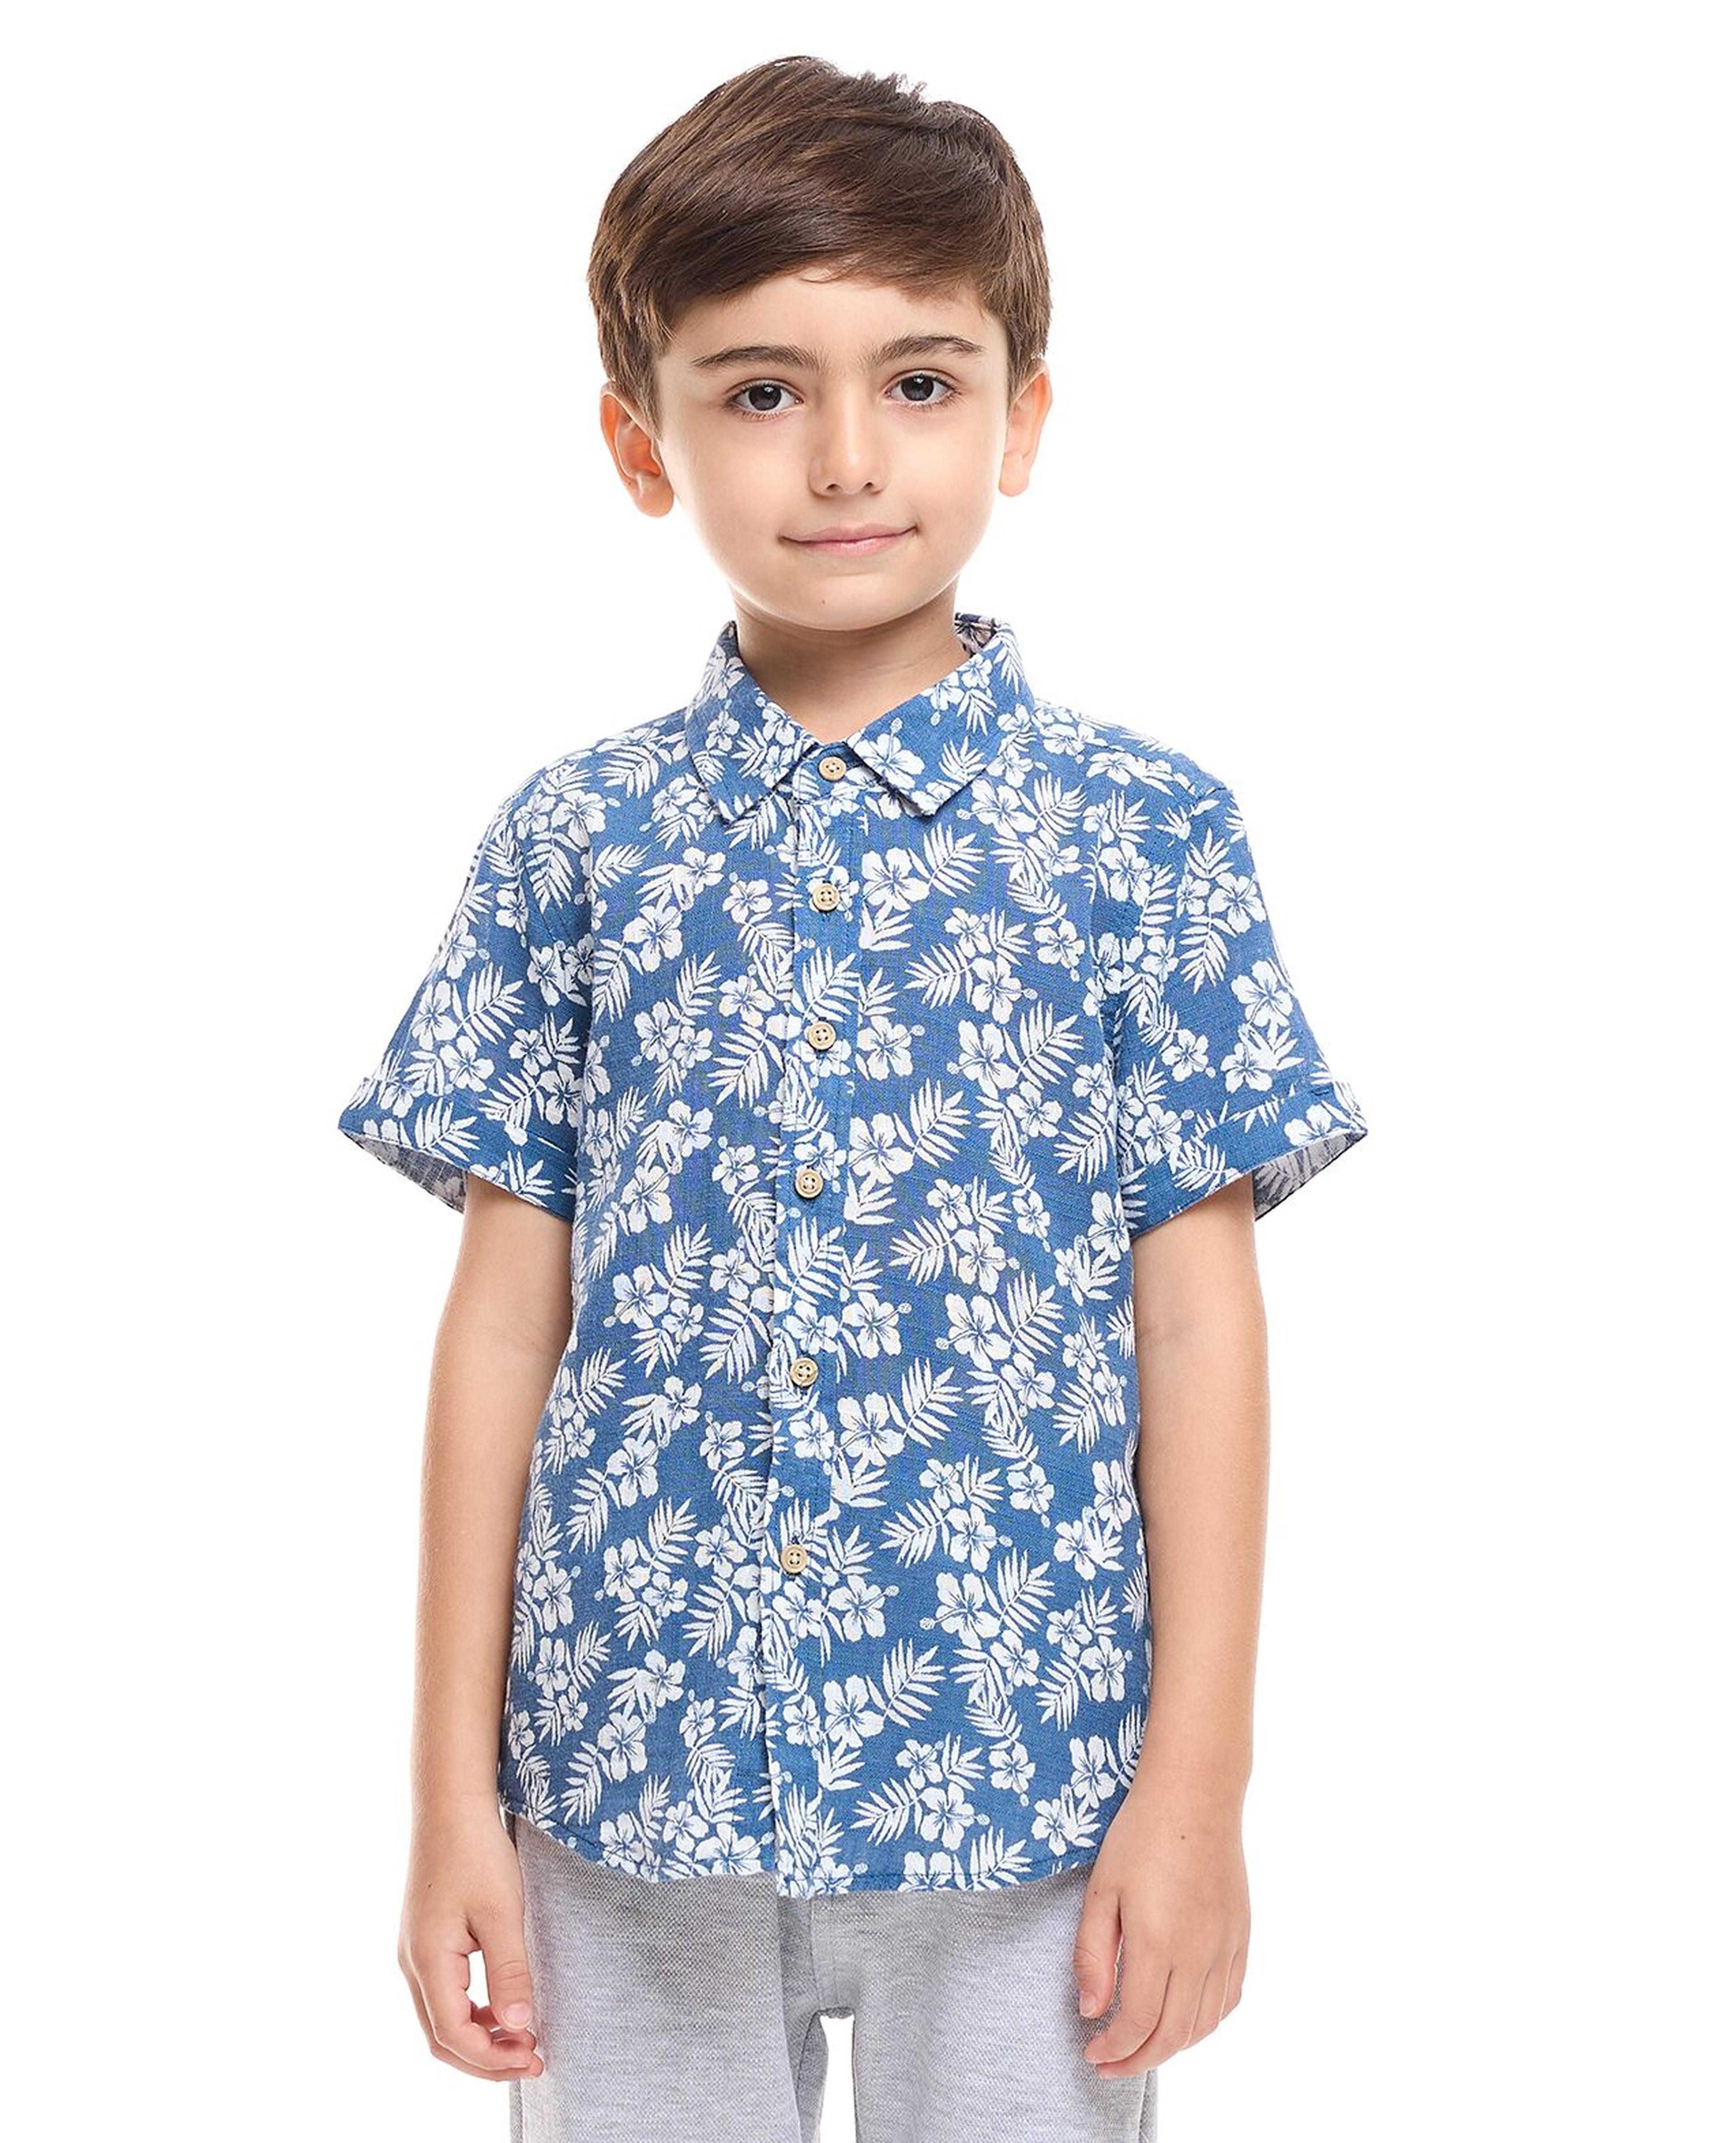 Floral Print Shirt with Spread Collar and Short Sleeves